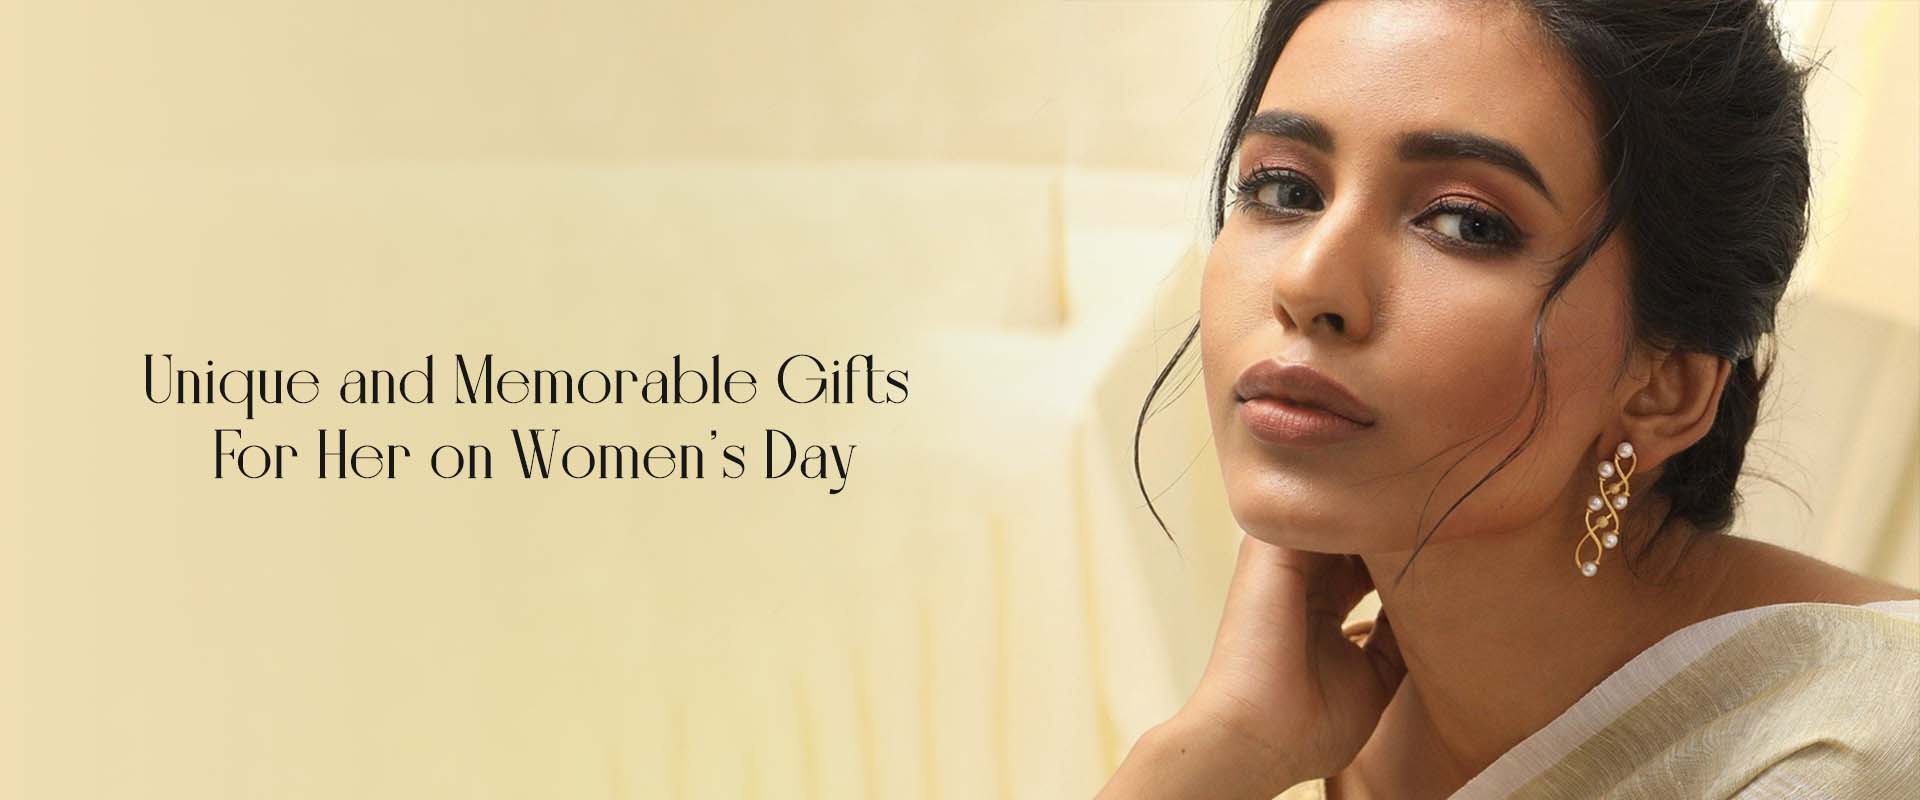 Unique and Memorable Gifts For Her on Women’s Day